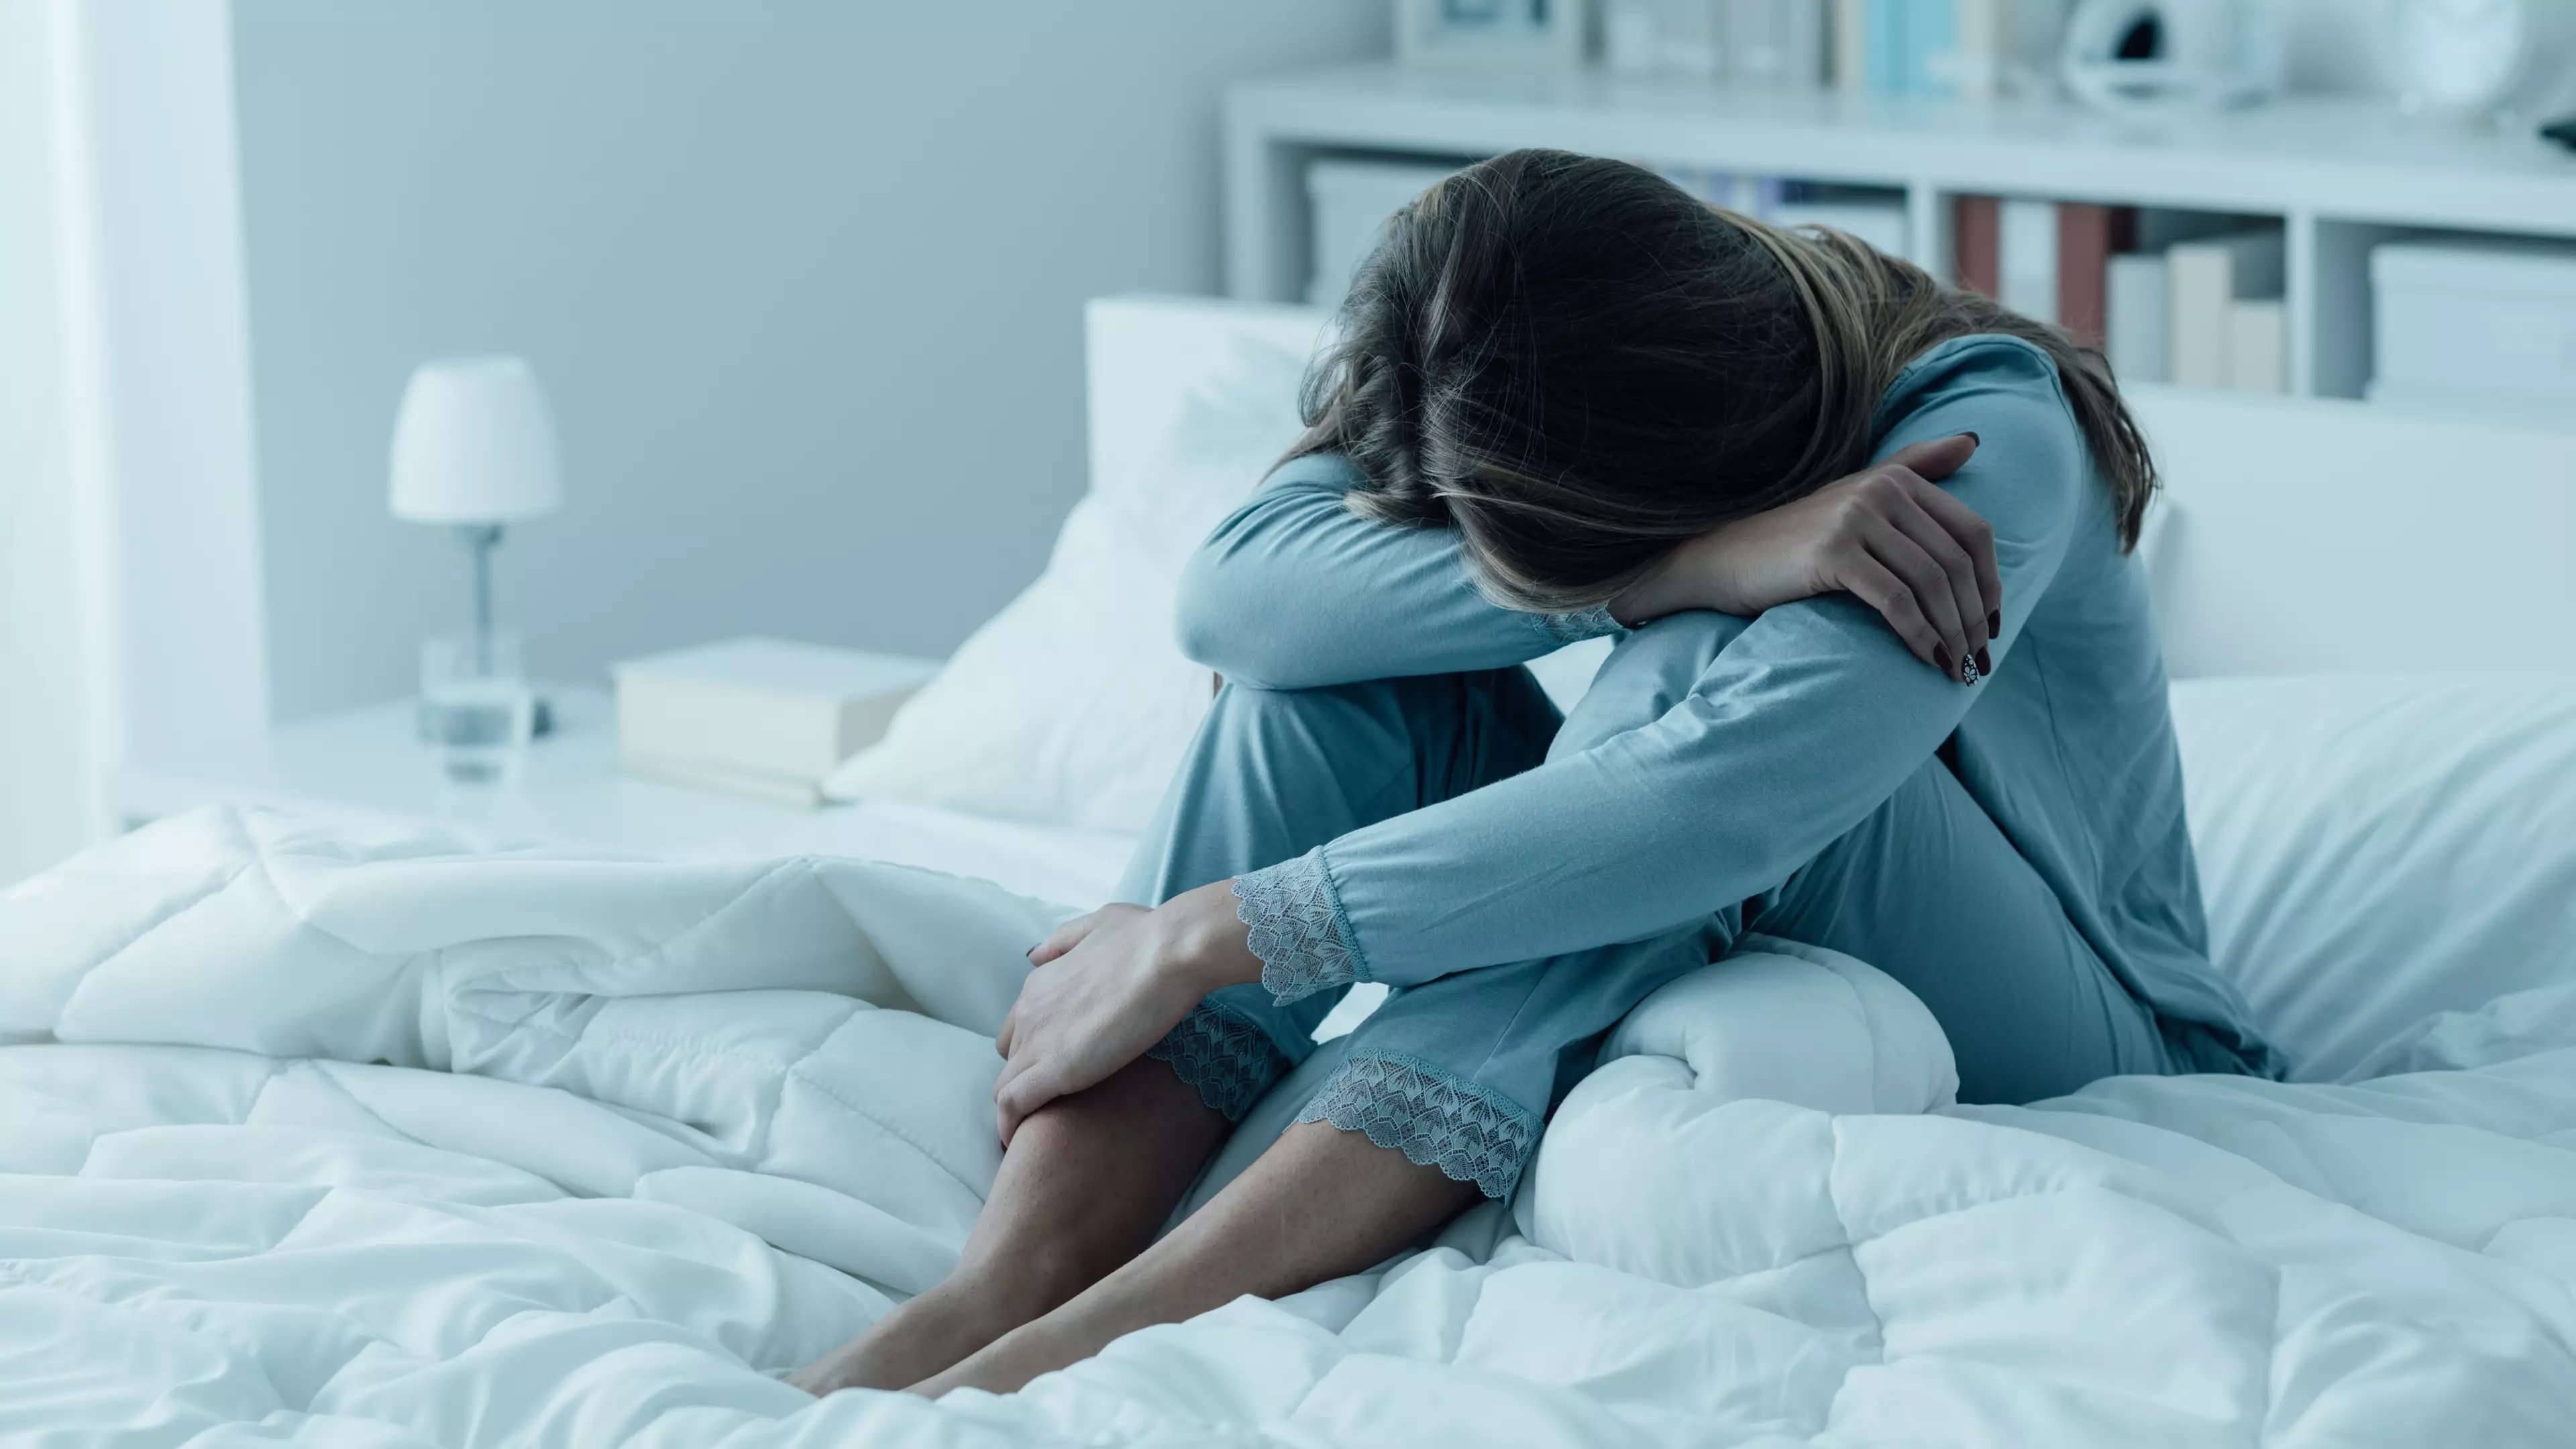 What Is PMDD? Women Describe Anxiety, Mood Swings And Suicidal Thoughts